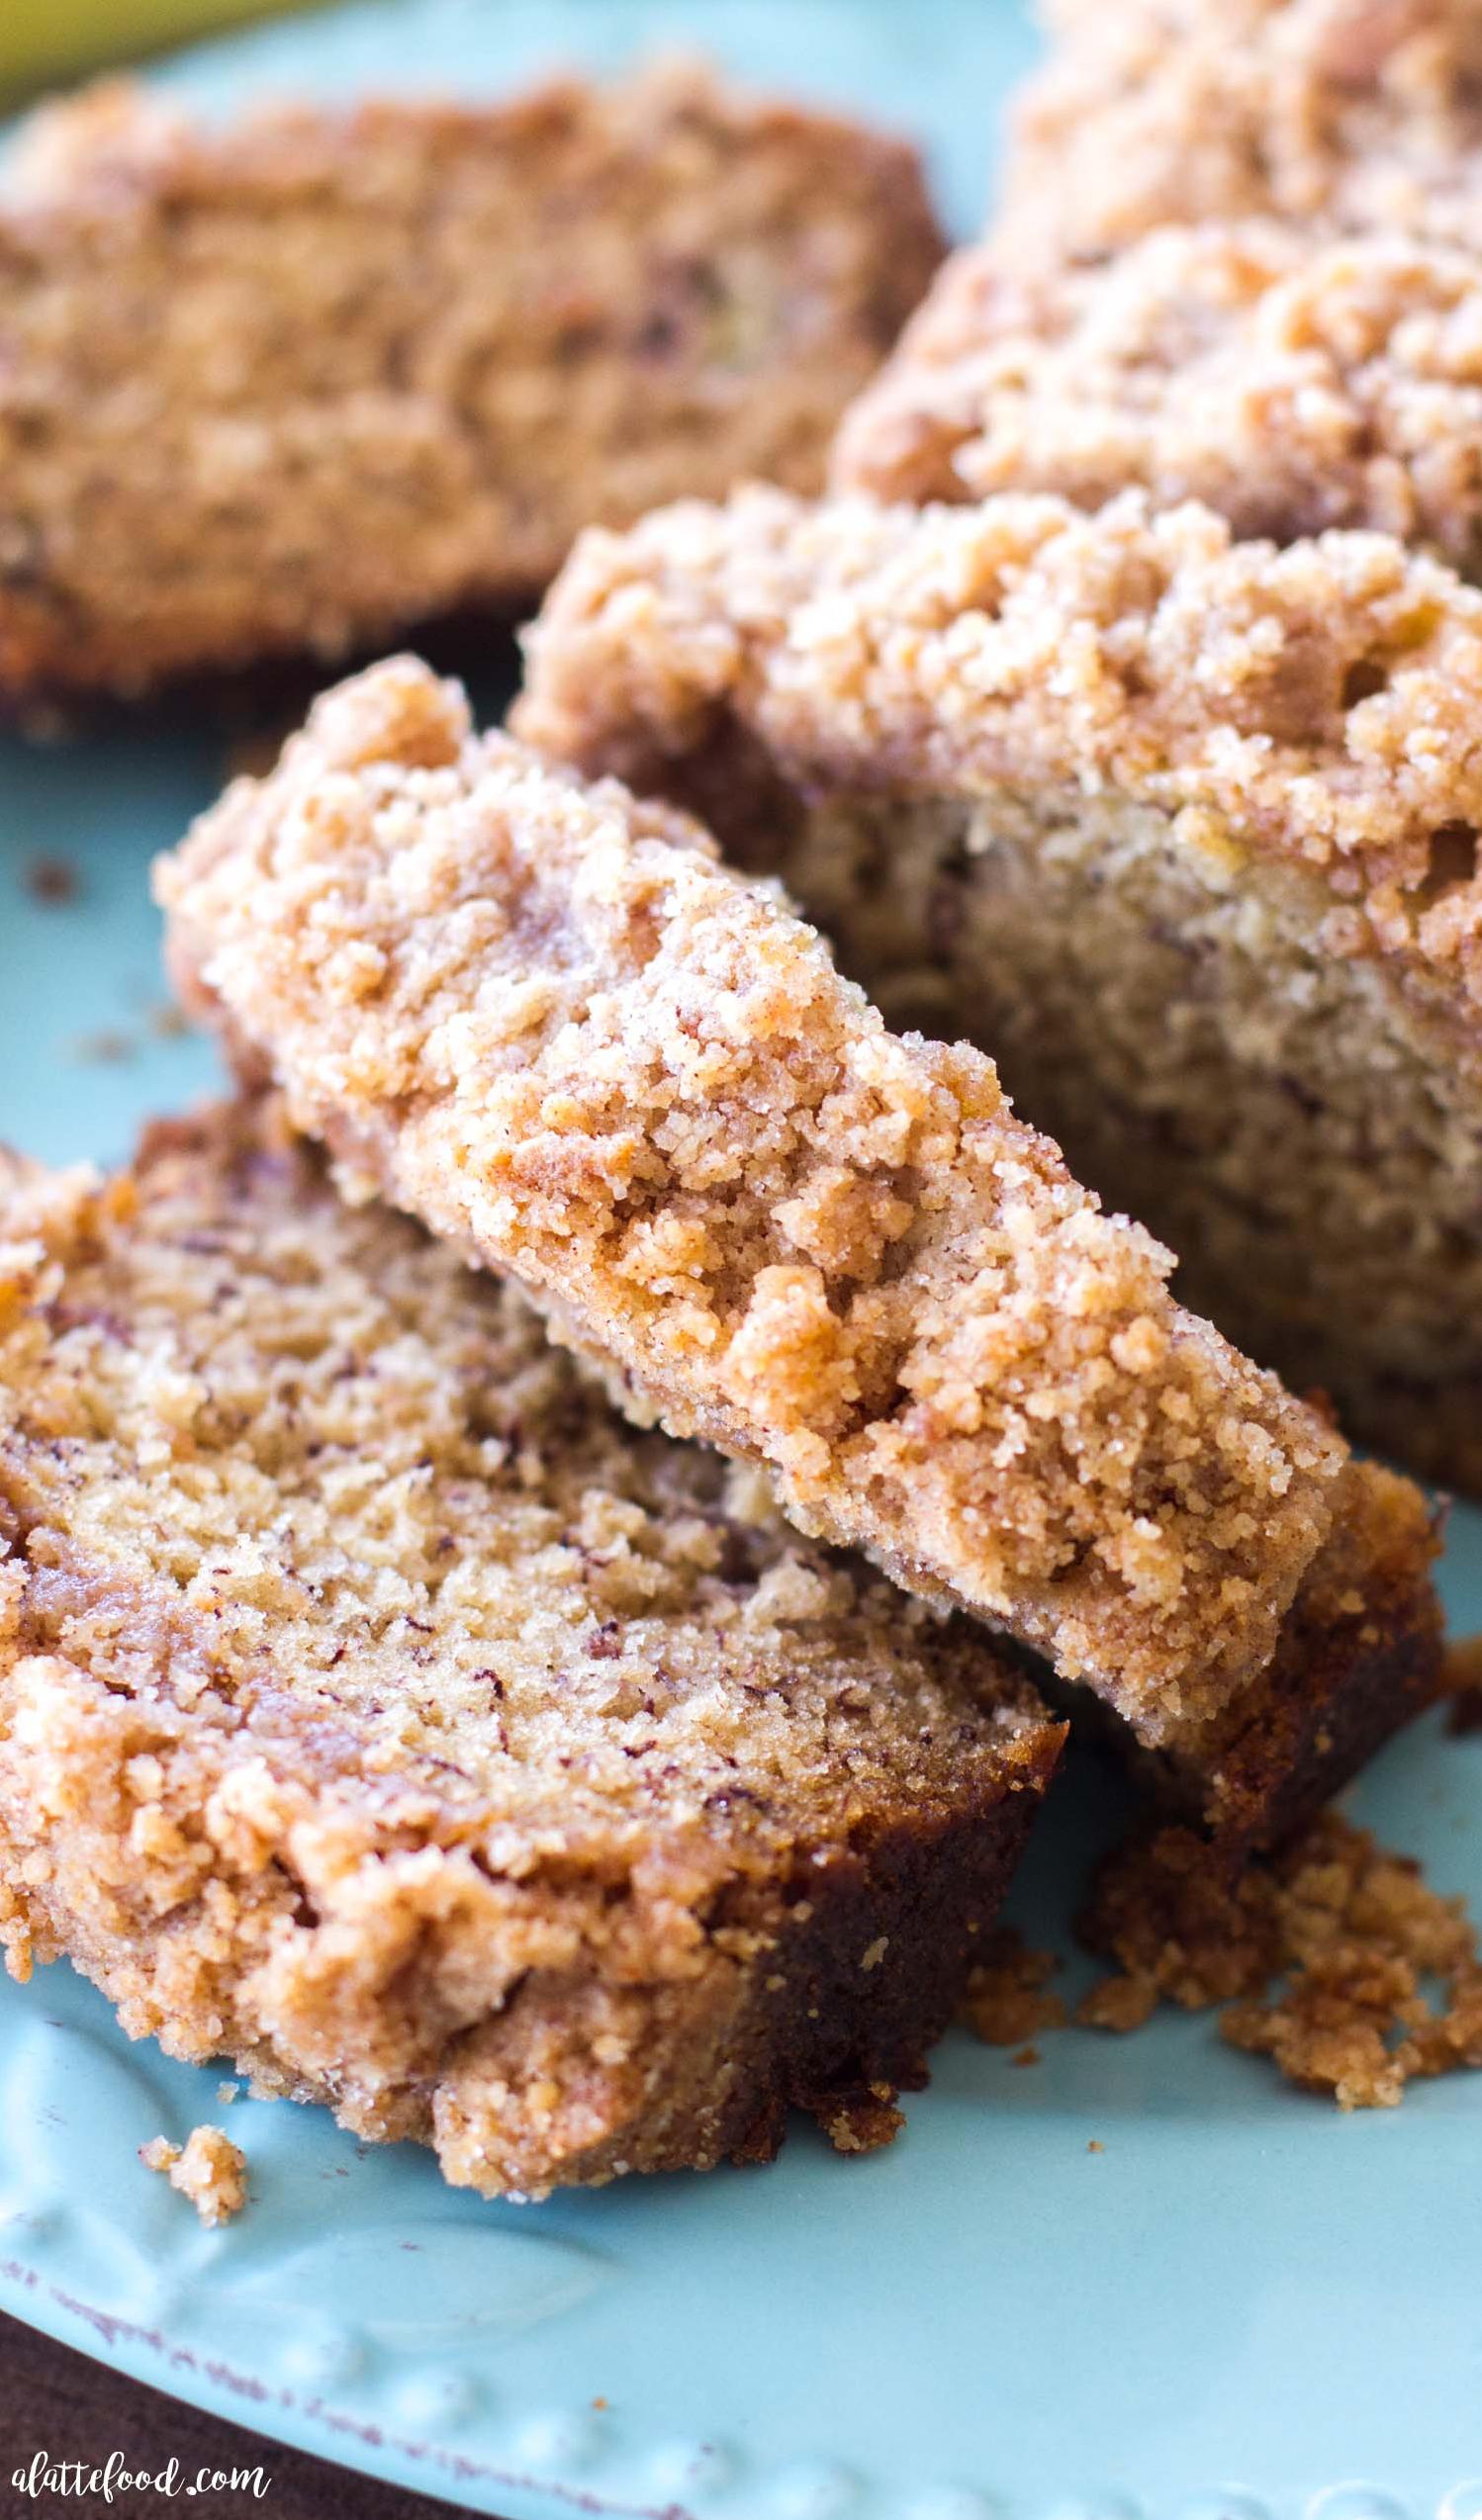  This banana nut coffee cake is too good to resist.